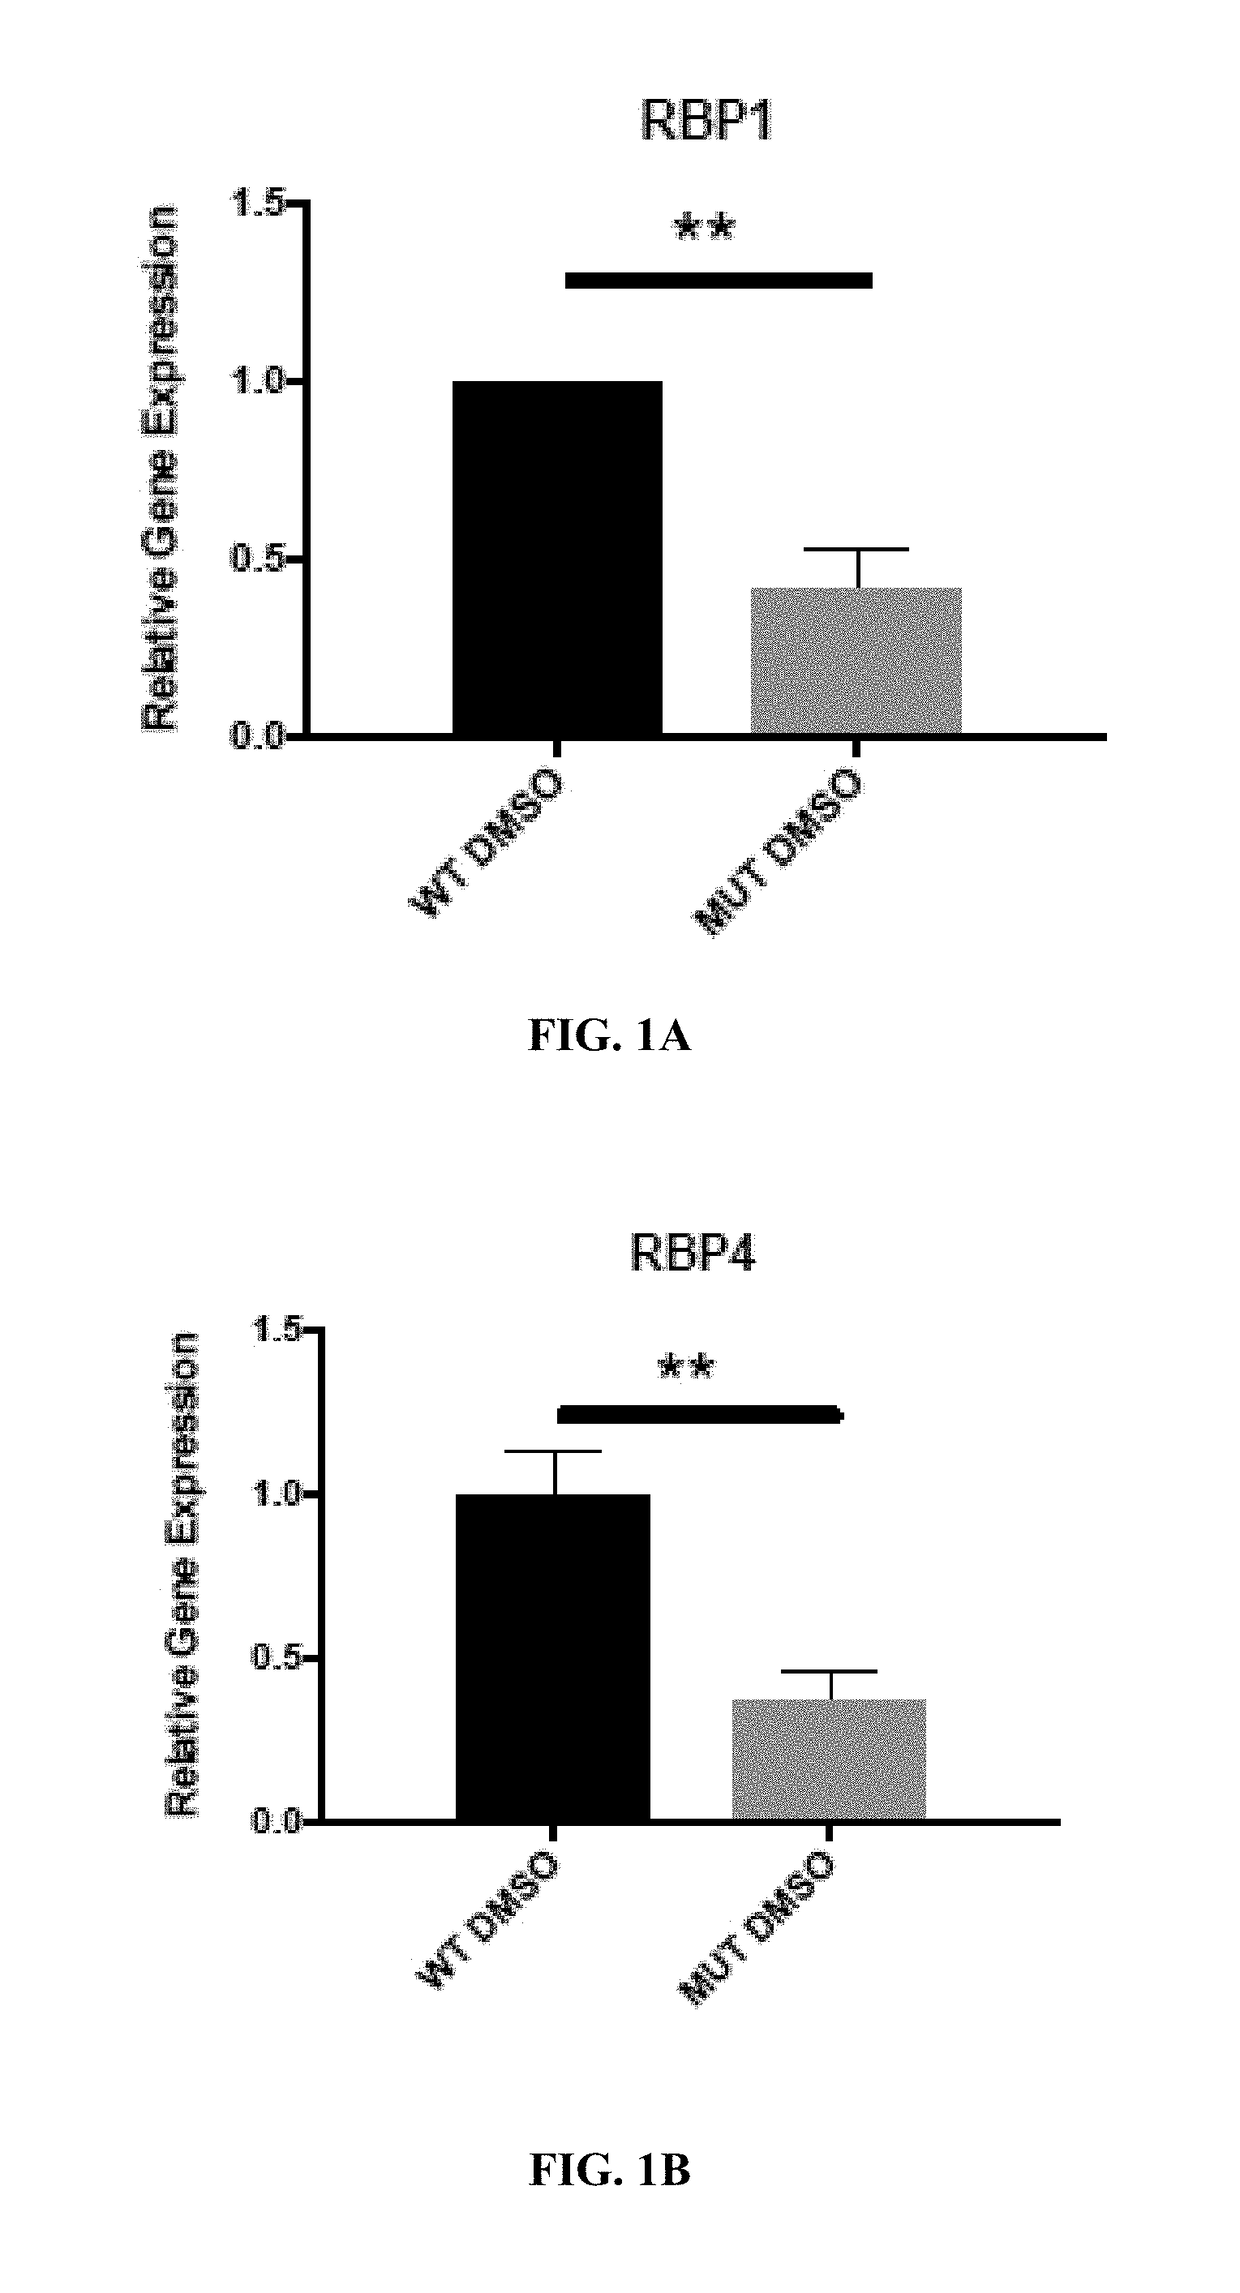 Retinoid compositions and methods of increasing immune cell-mediated killing of idh mutant cancer cells